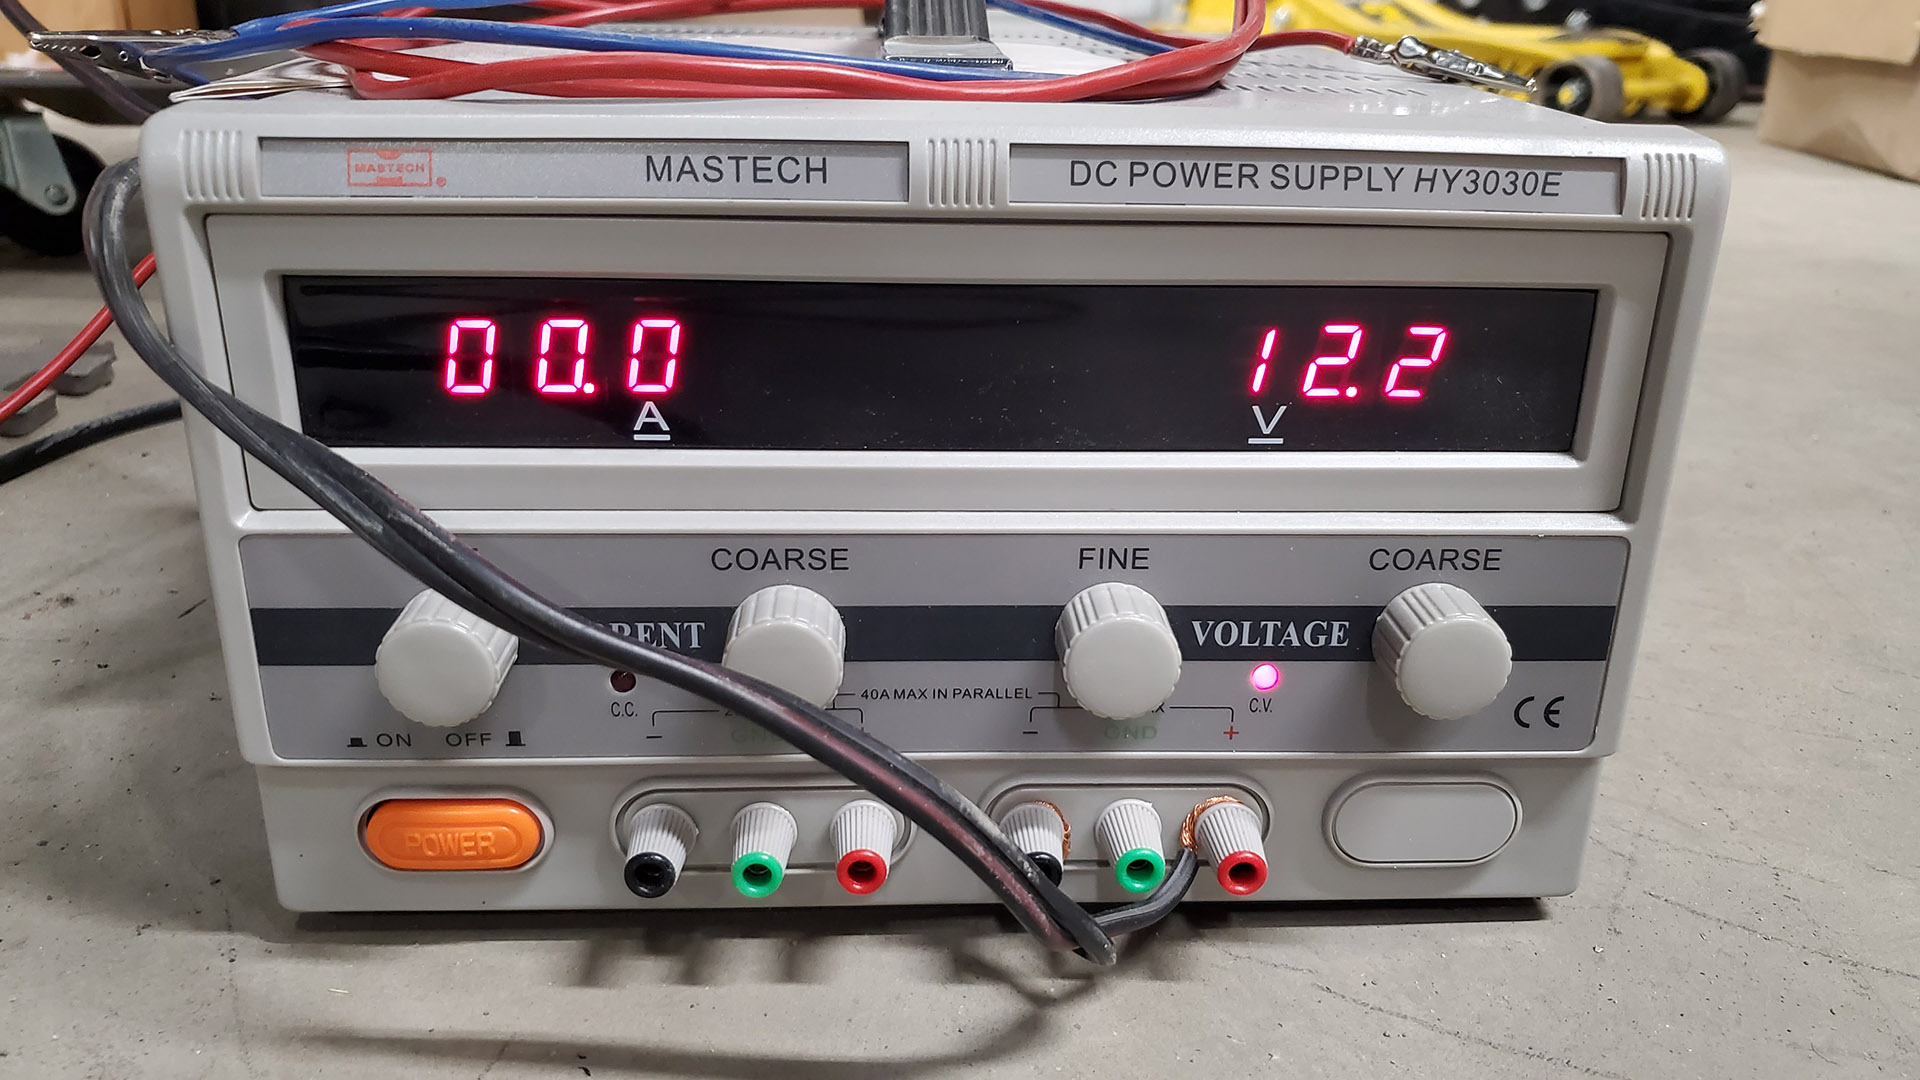 Power supply was temporarily connected to the harness for periodic tests